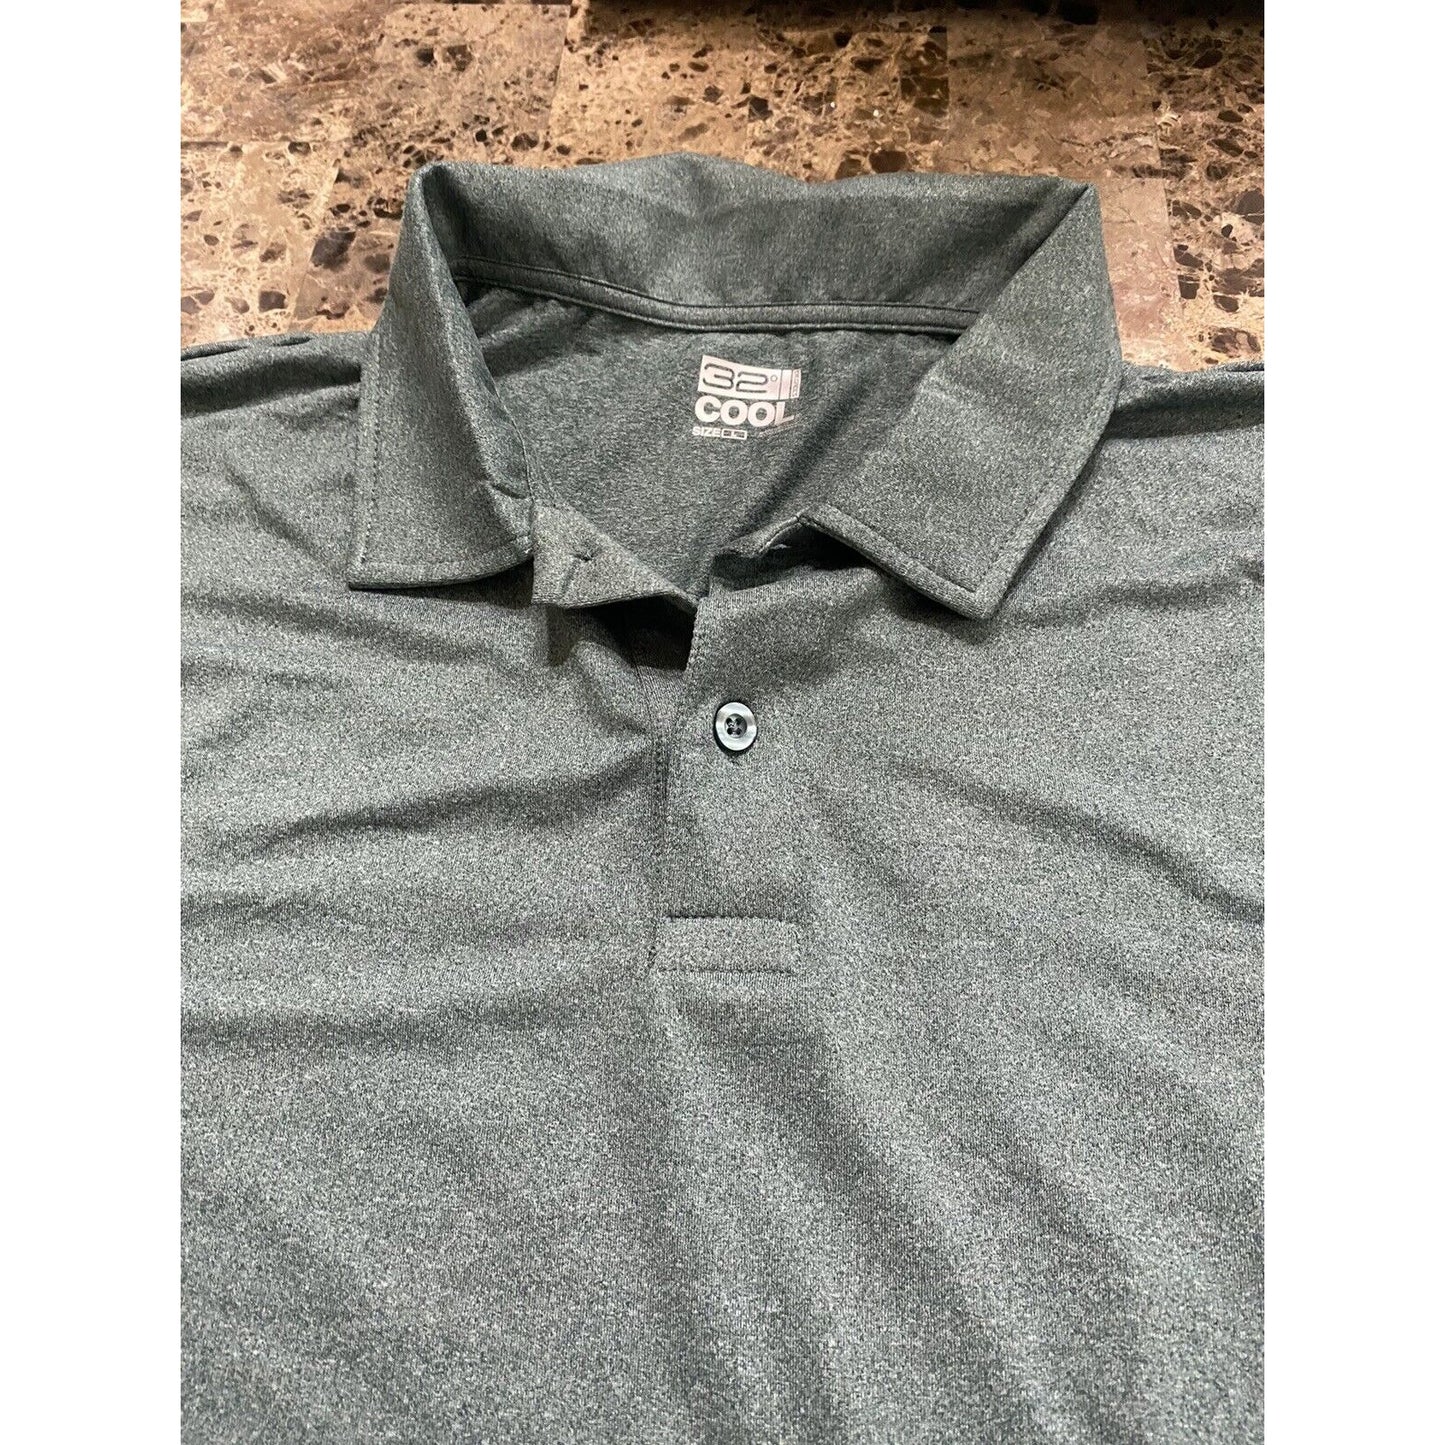 32 Degrees Cool Men’s Large Green 1/4 Button Athletic Polo Shirt